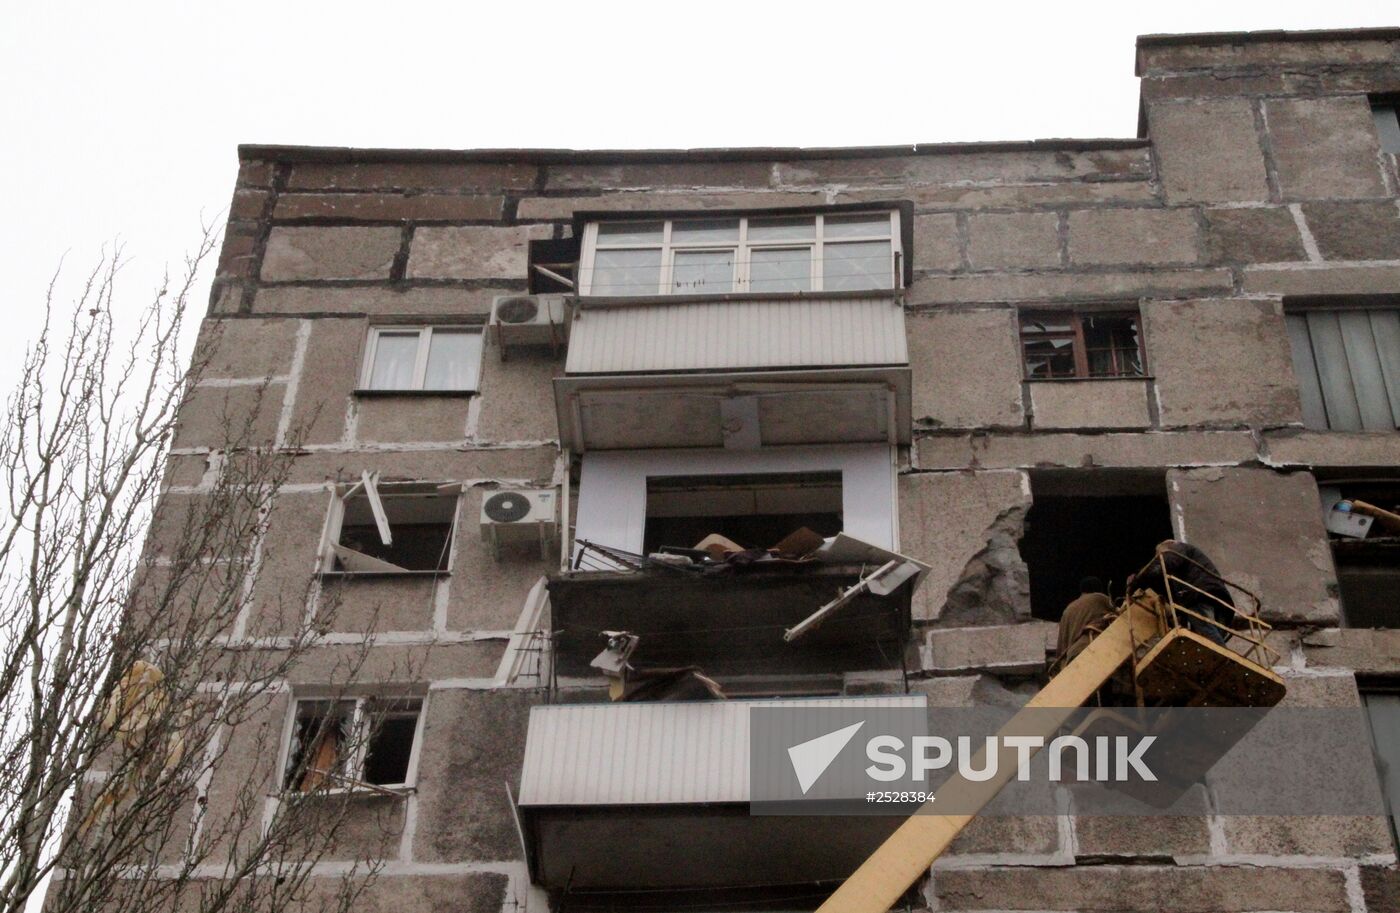 Town of Horlivka after shelling by Ukrainian army